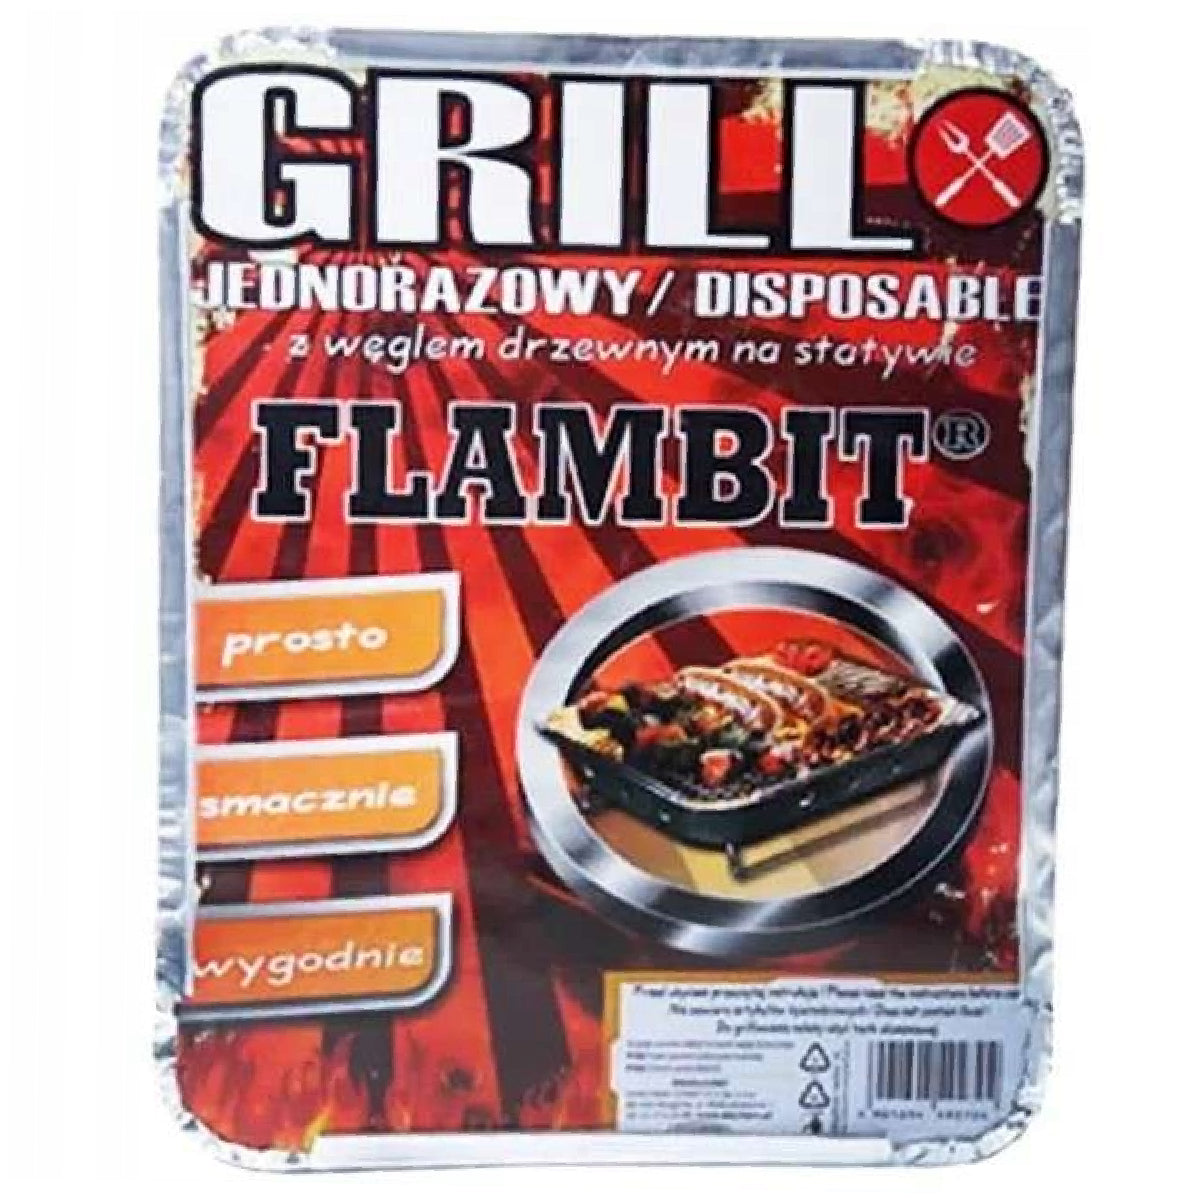 Flambit - Disposable Barbecue Grill with Charcoal - 2Pcs - Continental Food Store